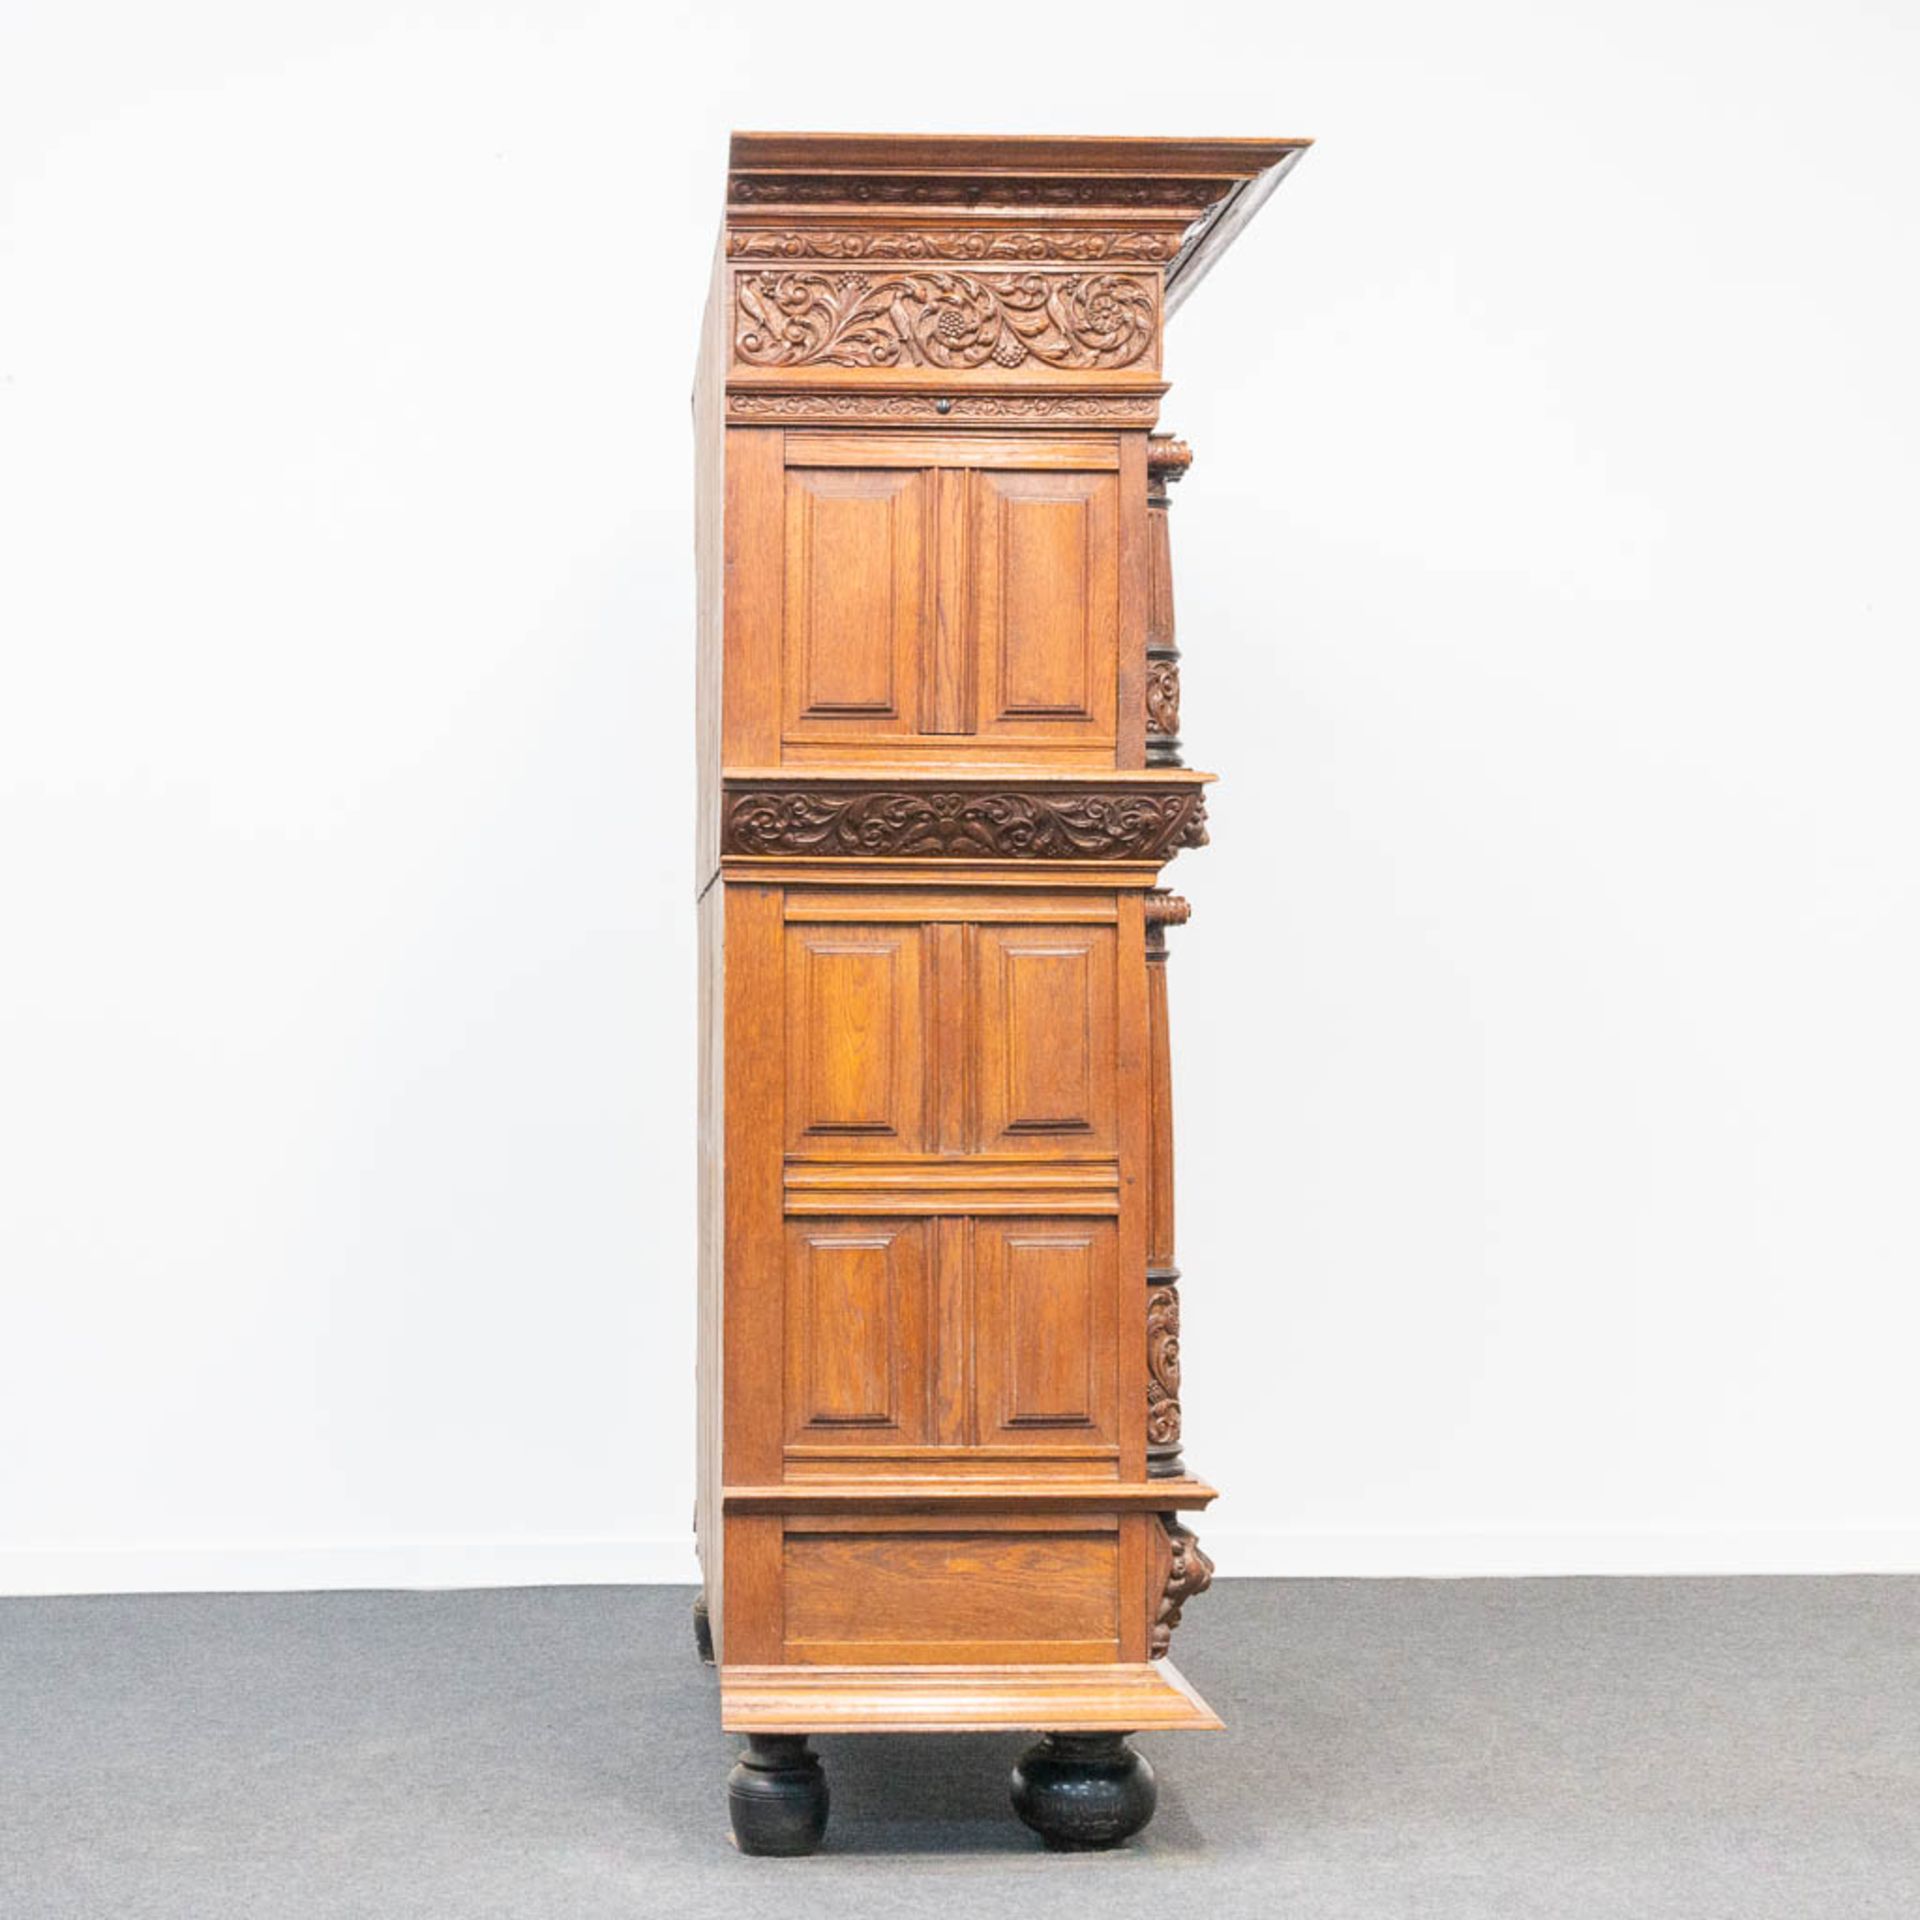 A cabinet, made in Flemish renaissance style, oak with fine sculptures, 19th century. - Image 3 of 27